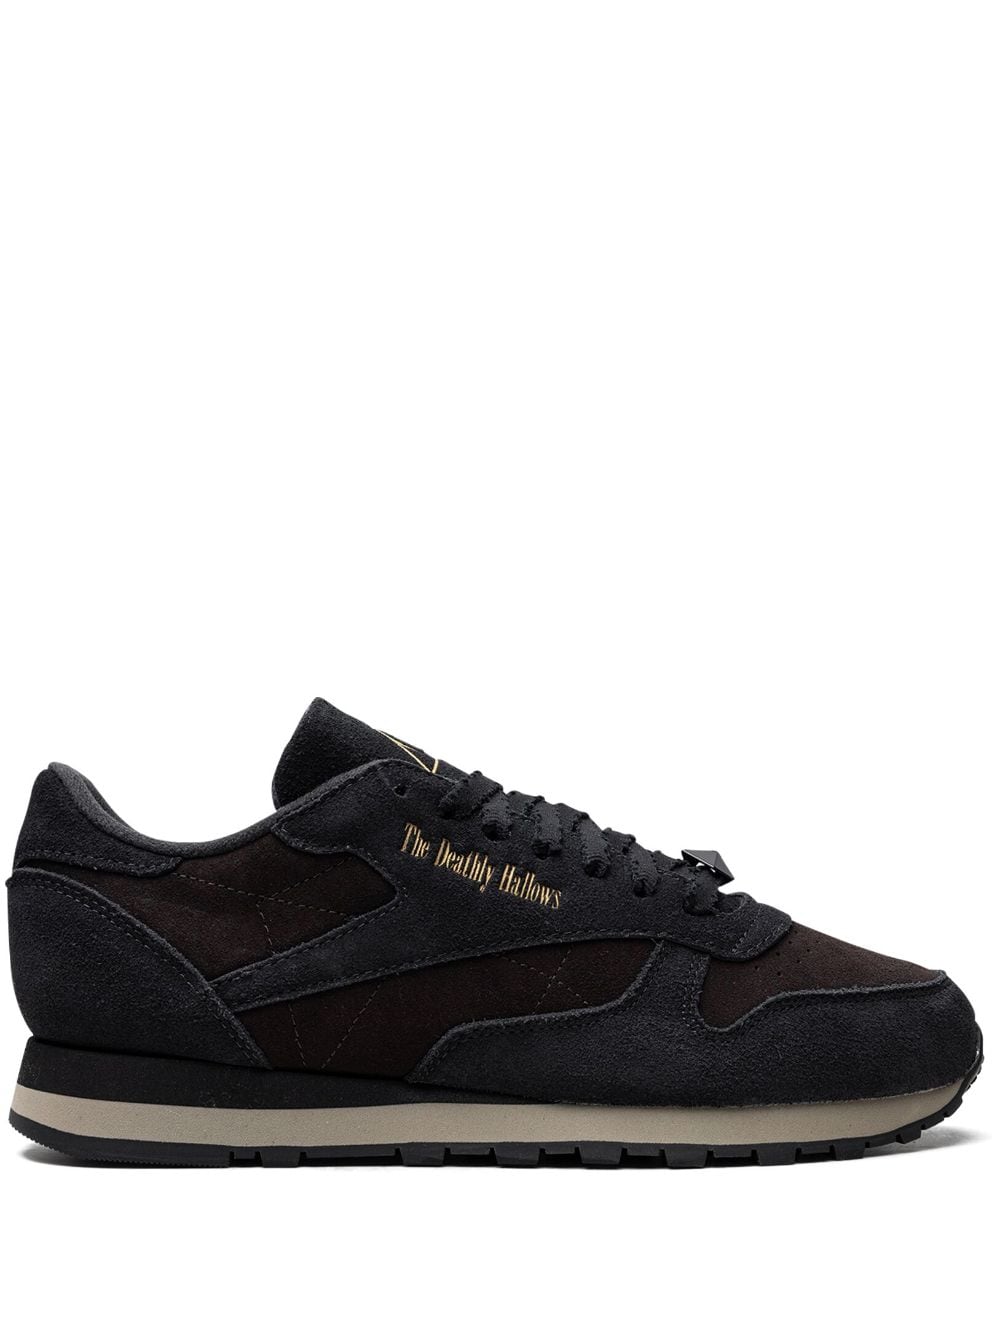 Reebok x Harry Potter Classic Leather "The Deathly Hallows" sneakers Black